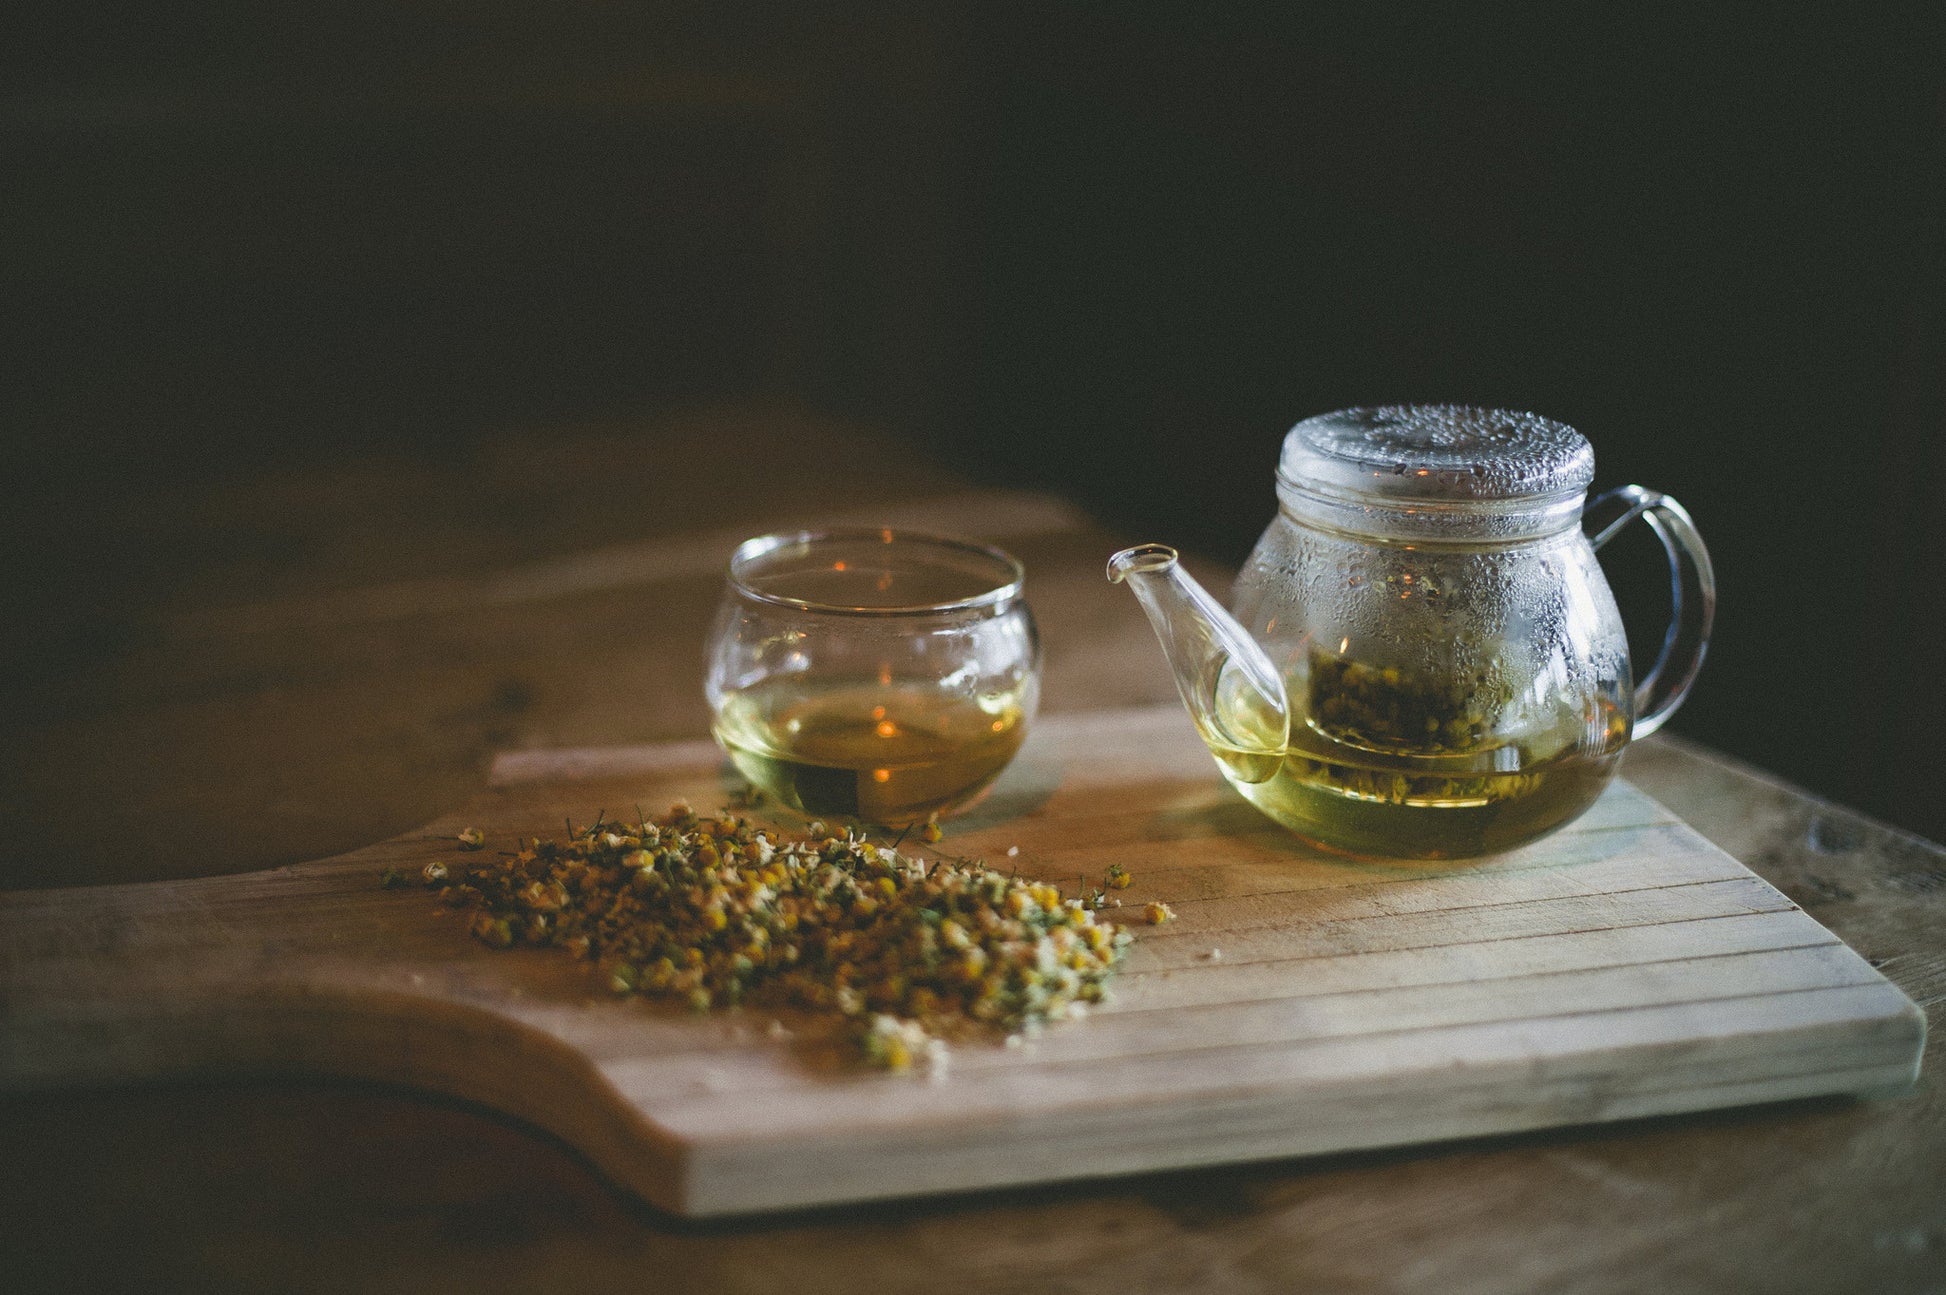 Tea pot infuseing Chamomile Blossoms in a winderful evening setting on a wooden table.